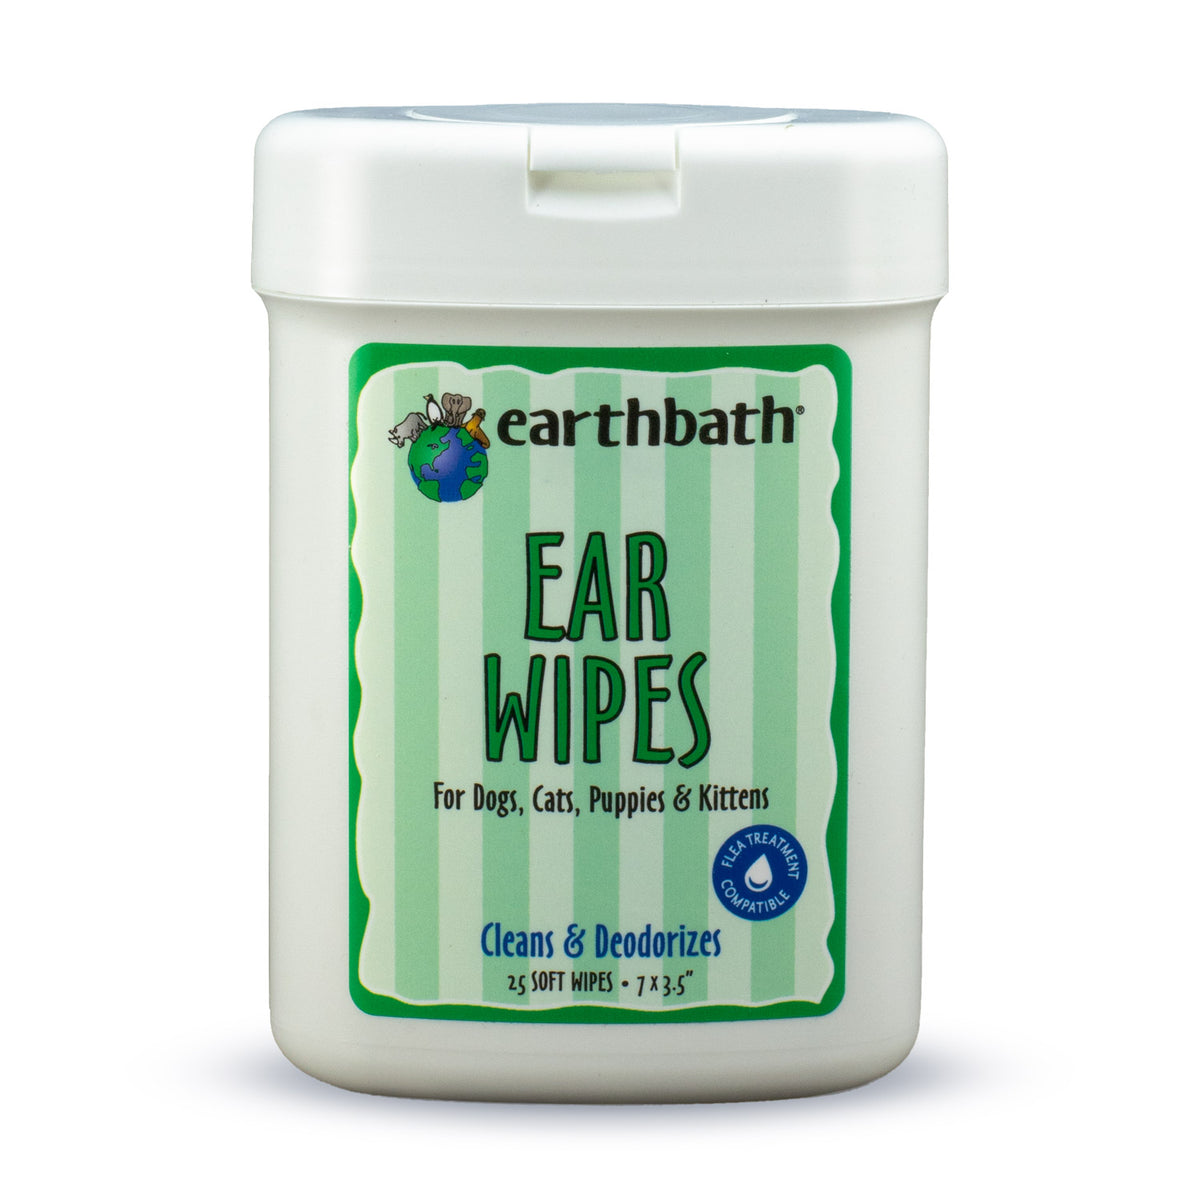 earthbath® Ear Wipes with Witch Hazel for Dogs, Cats, Puppies & Kittens, 25 ct re-sealable container